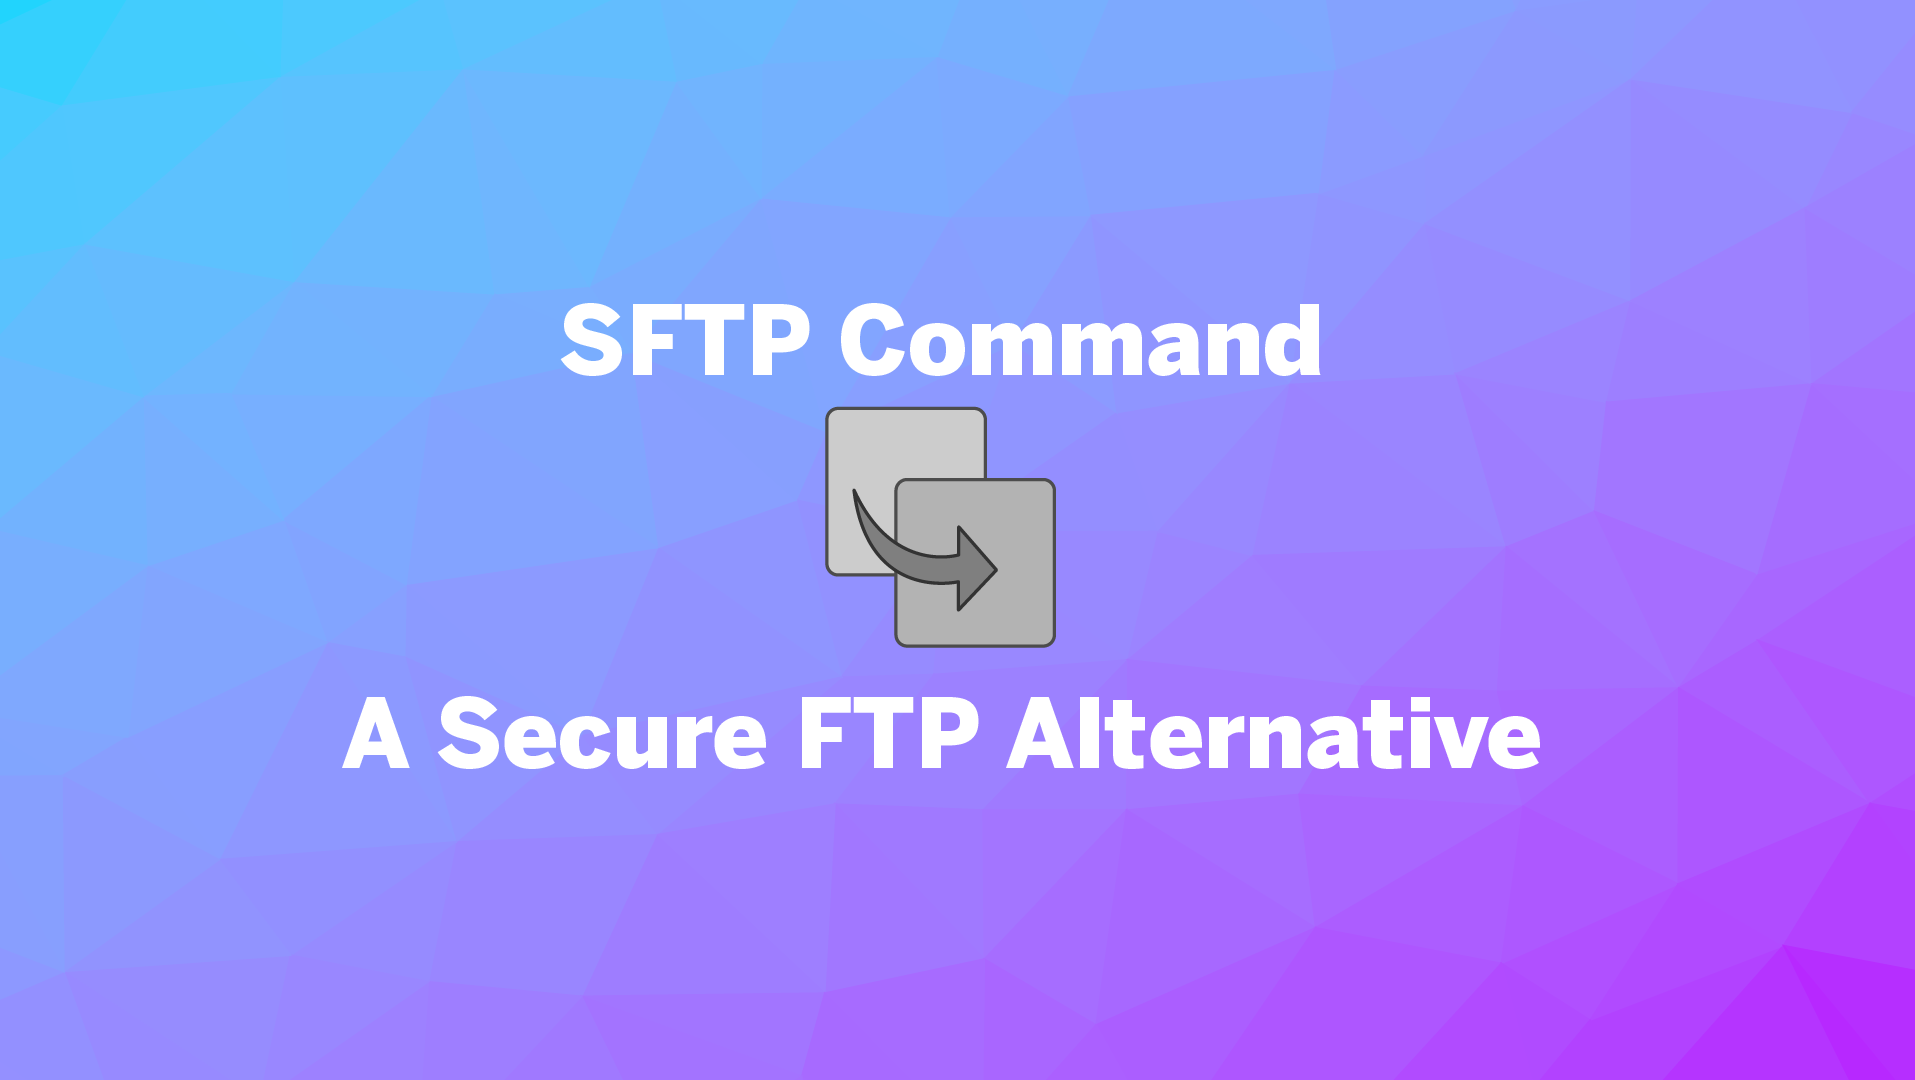 SFTP command